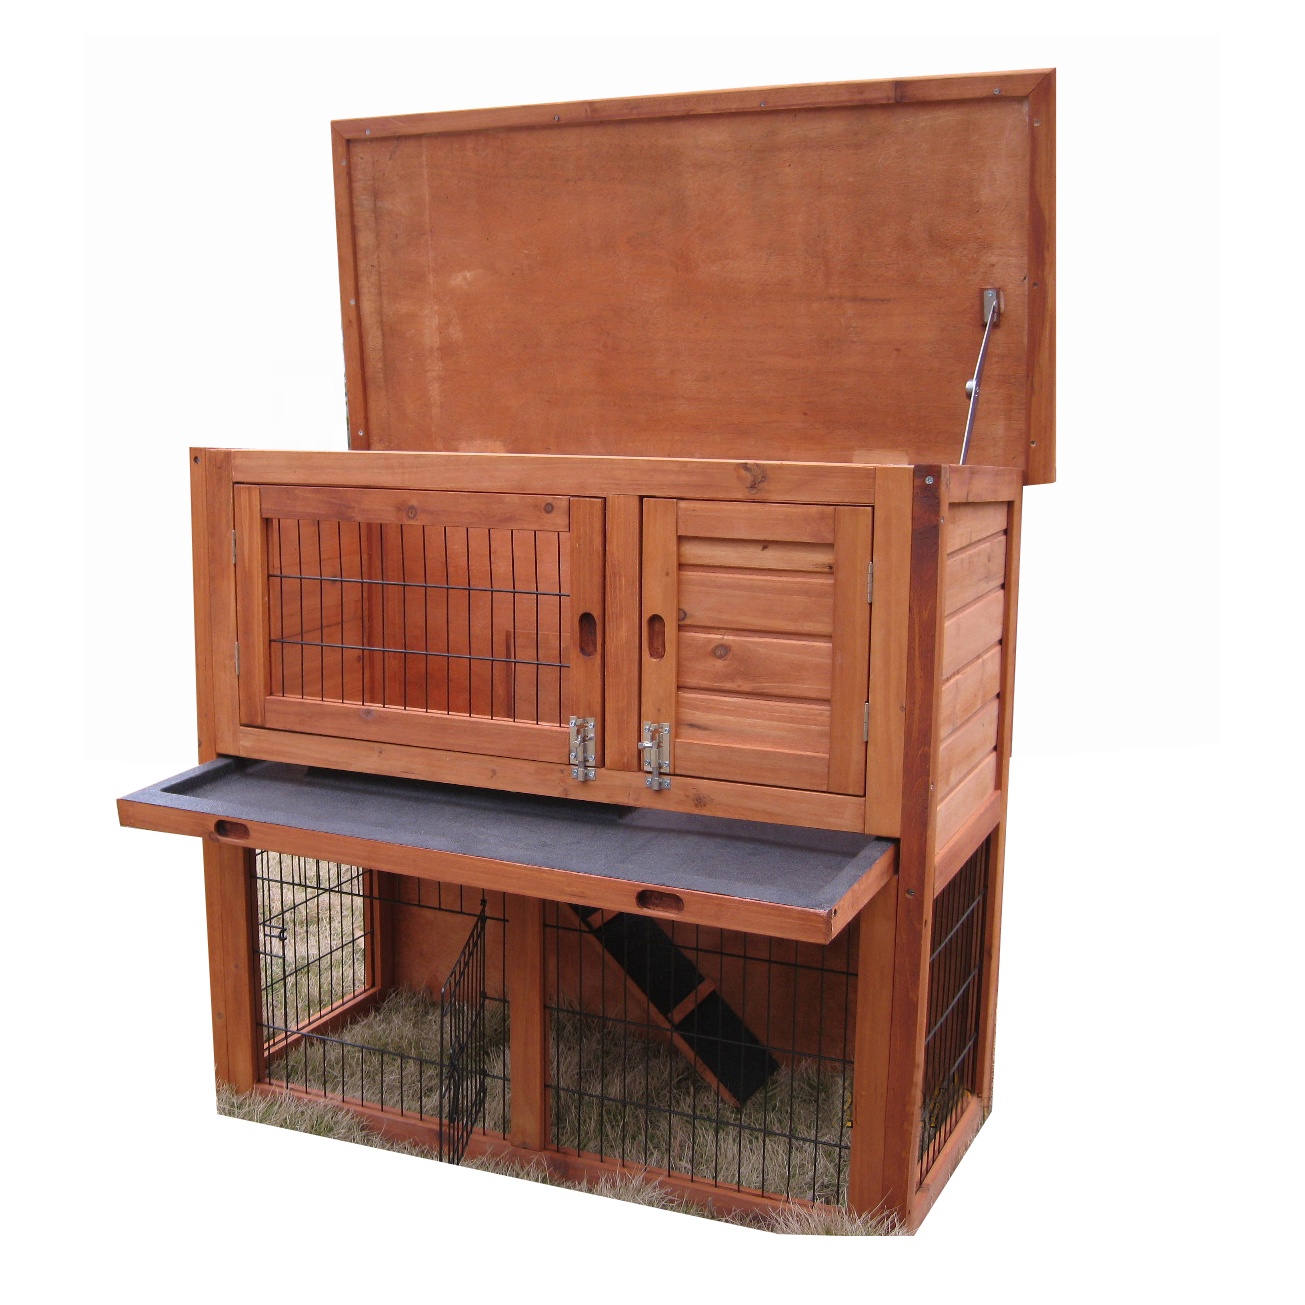 OEM Supply Petsmart Rabbit Cage -
 Factory Outdoor Wooden Indoor Rabbit Hutch Elevated Cage Habitat with Enclosed Run Wheels Ideal Rabbits Guinea Pig home – Easy